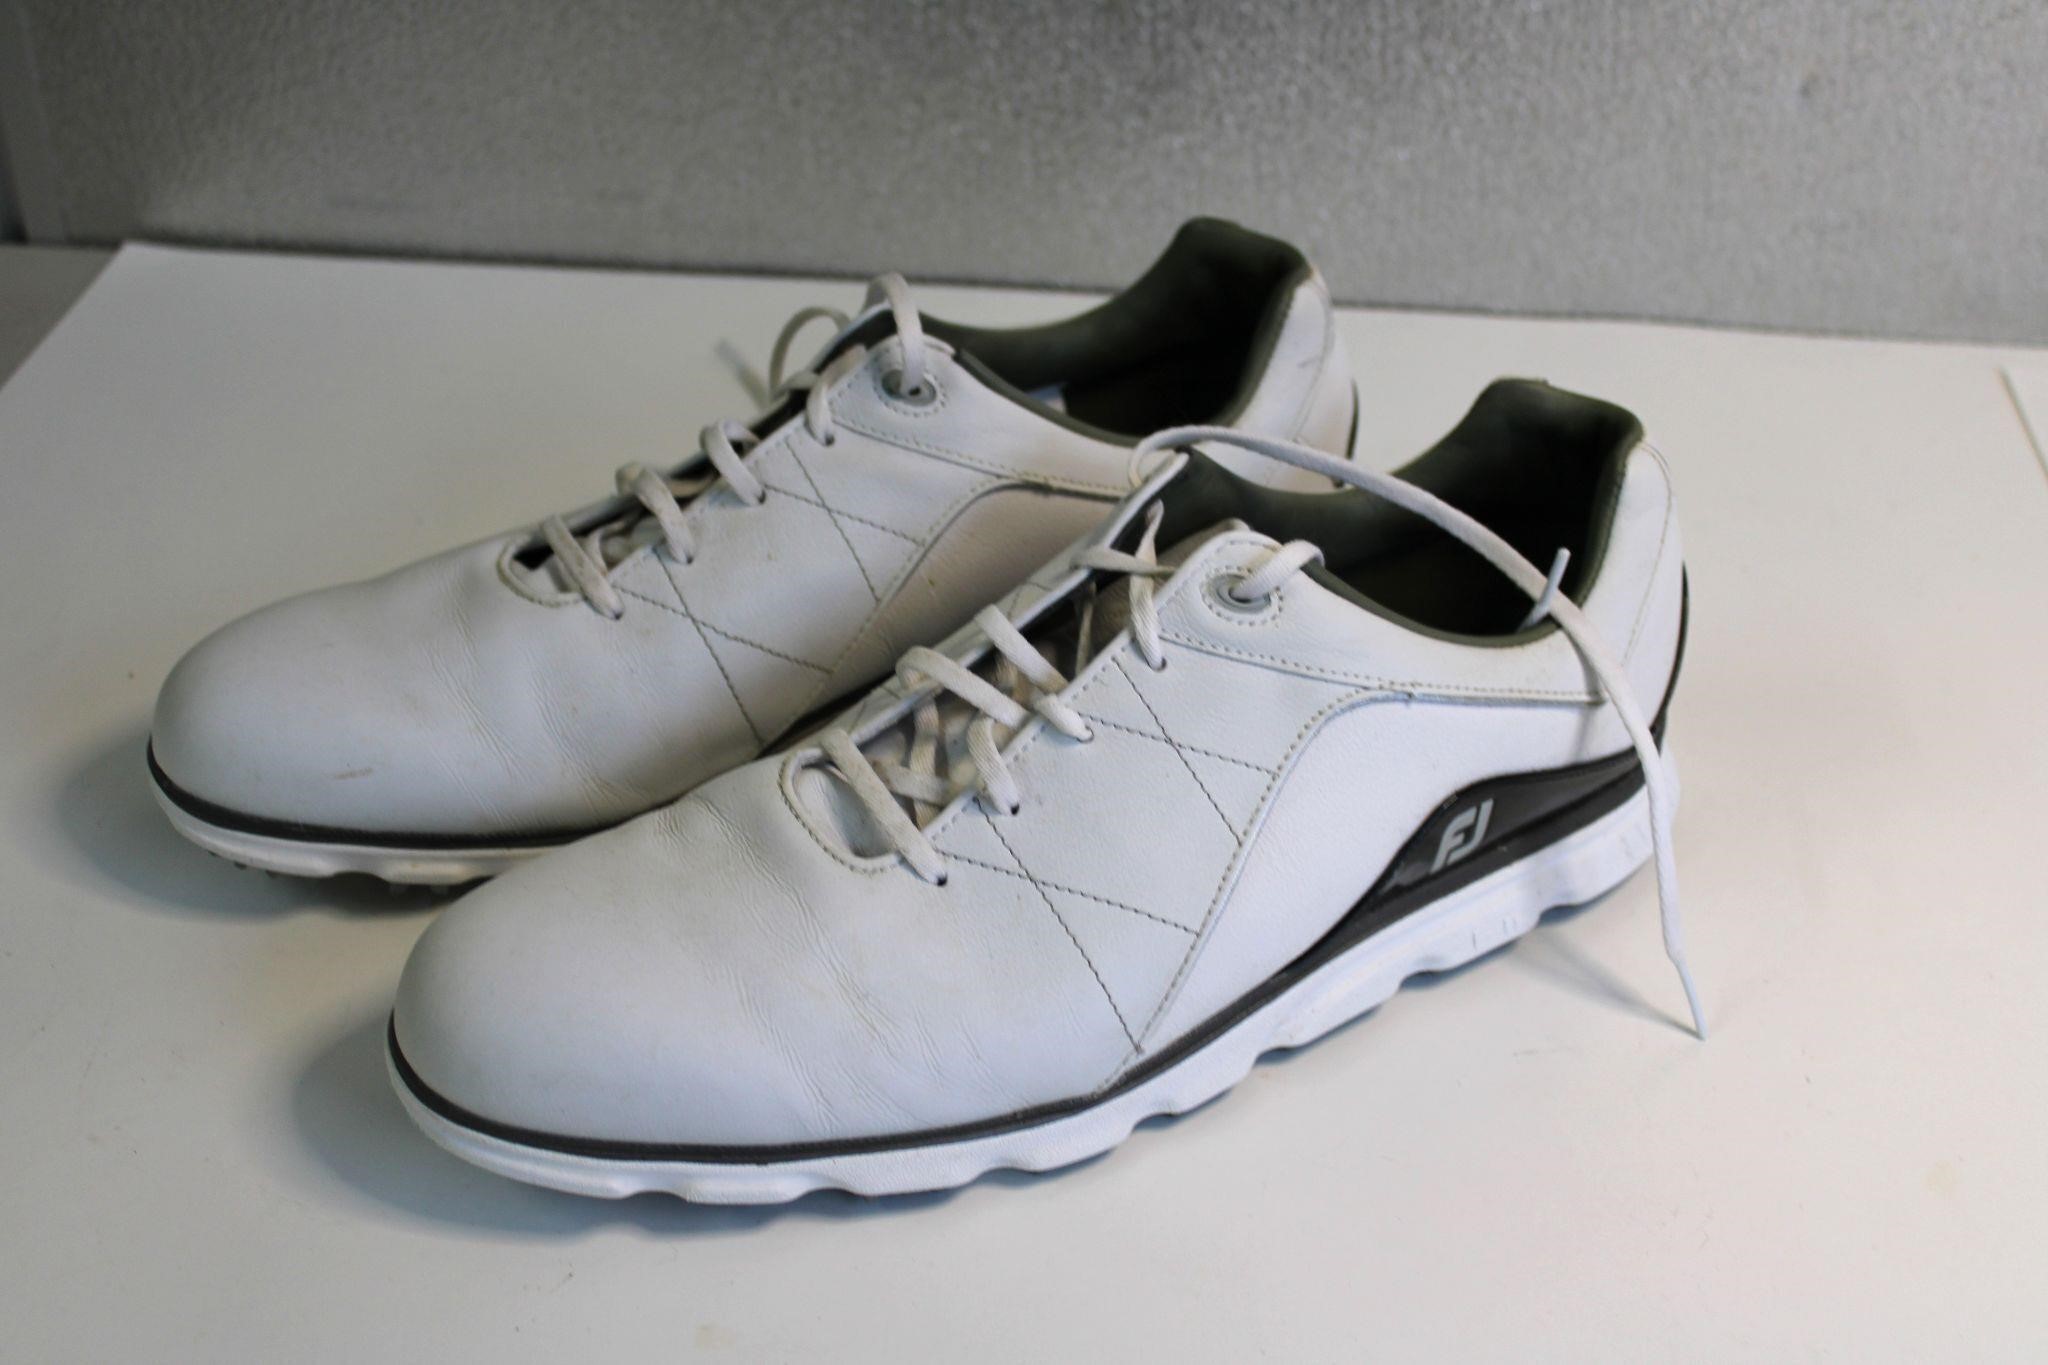 Leather Golf Shoes size 15